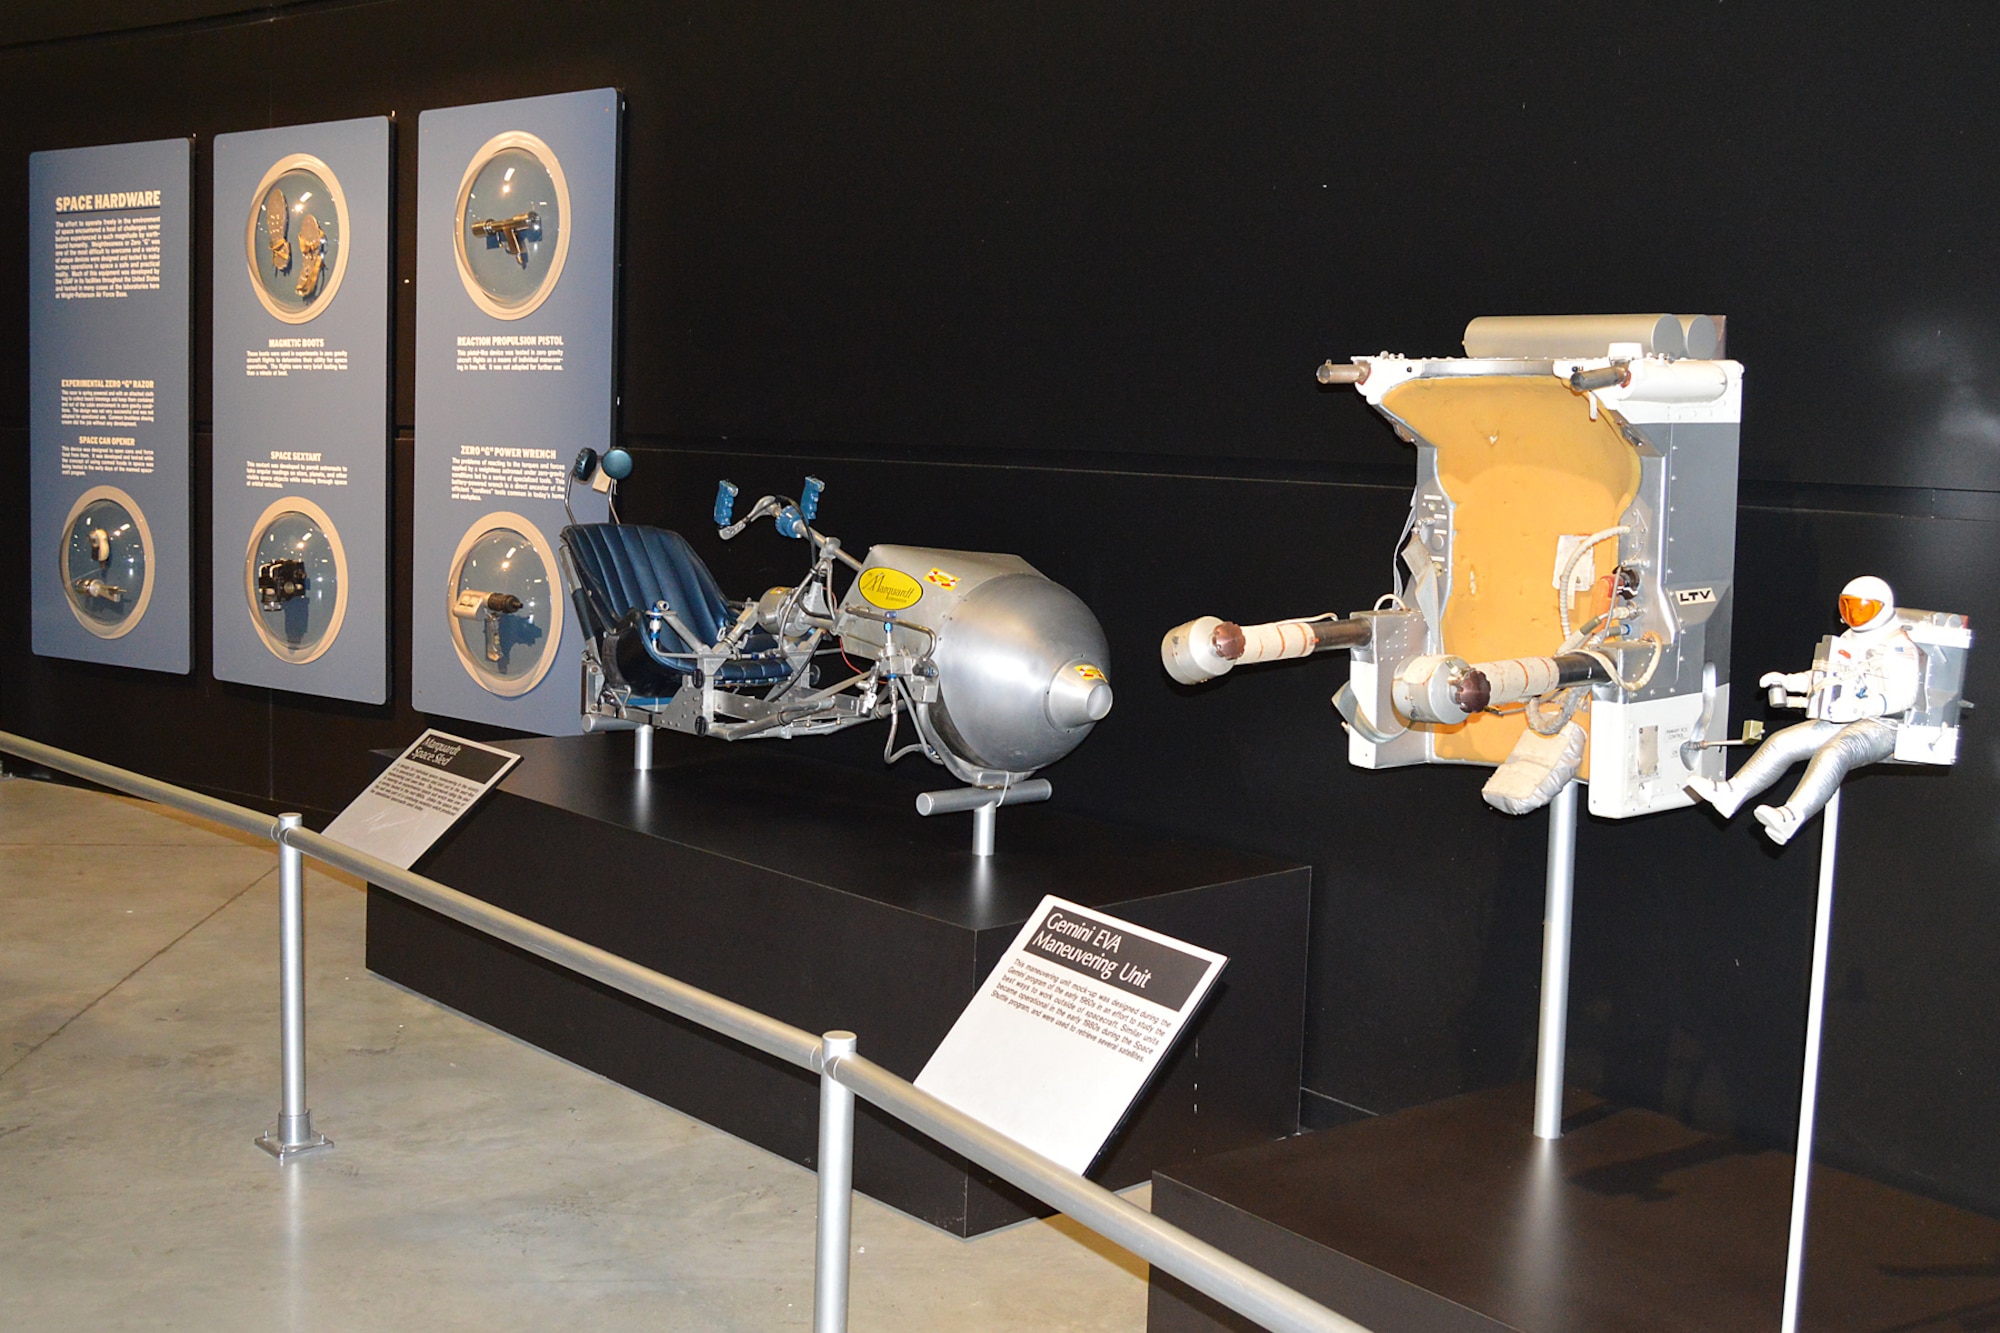 DAYTON, Ohio -- Space Hardware, Marquardt Space Sled and Gemini EVA Maneuvering Unit on display in the Missile and Space Gallery at the National Museum of the United States Air Force. (U.S. Air Force photo)
